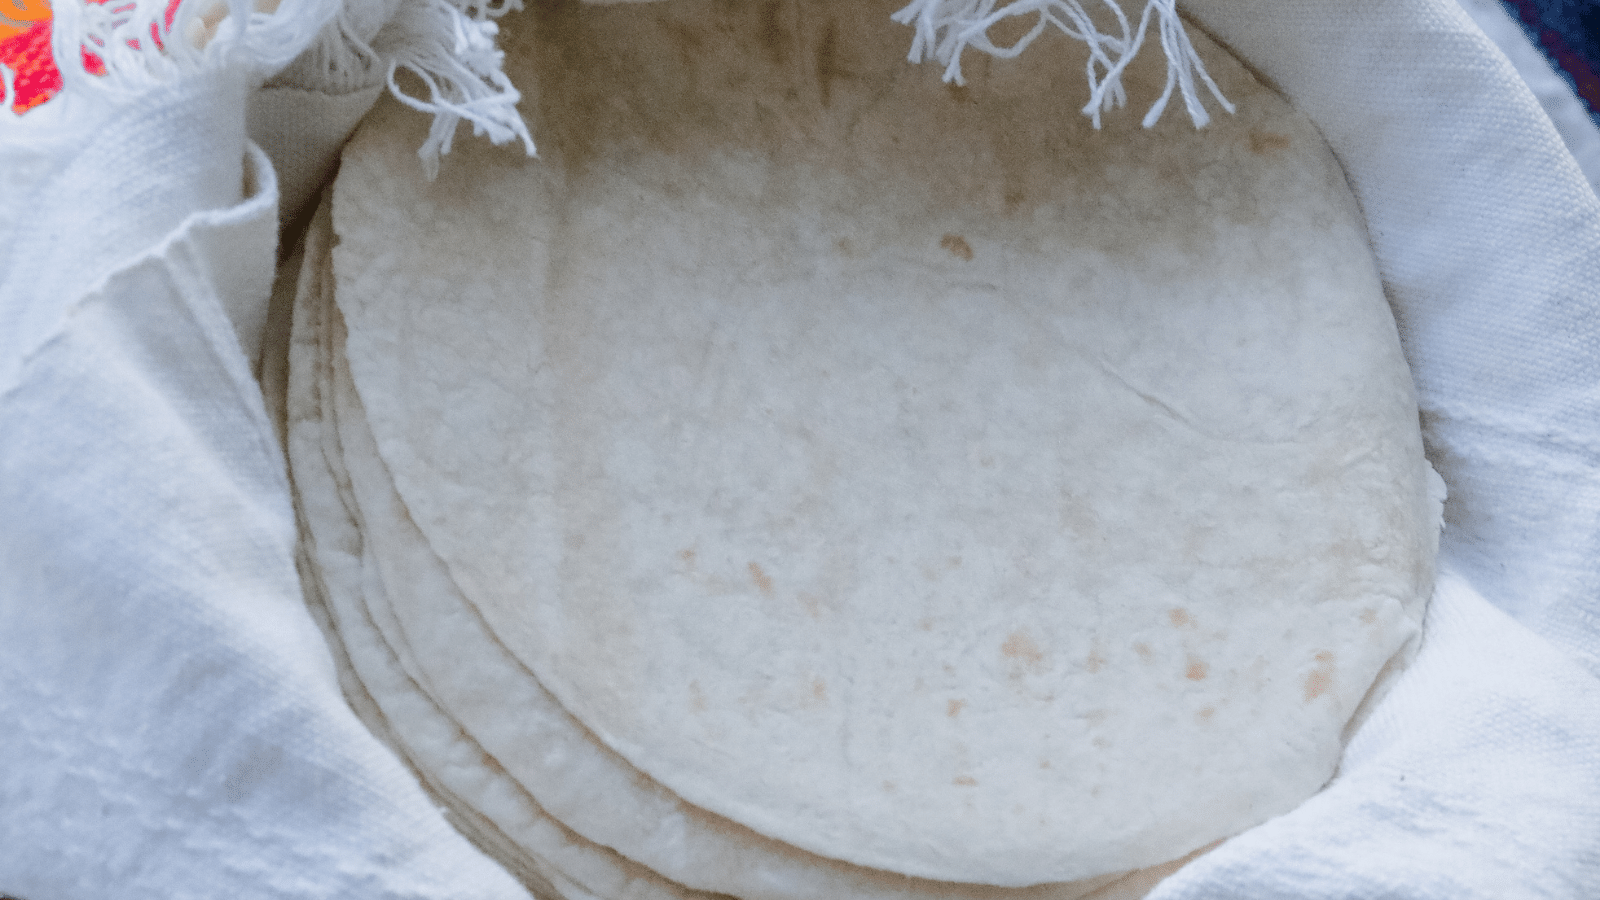 How to store sourdough tortillas while making them to allow them to become pliable.